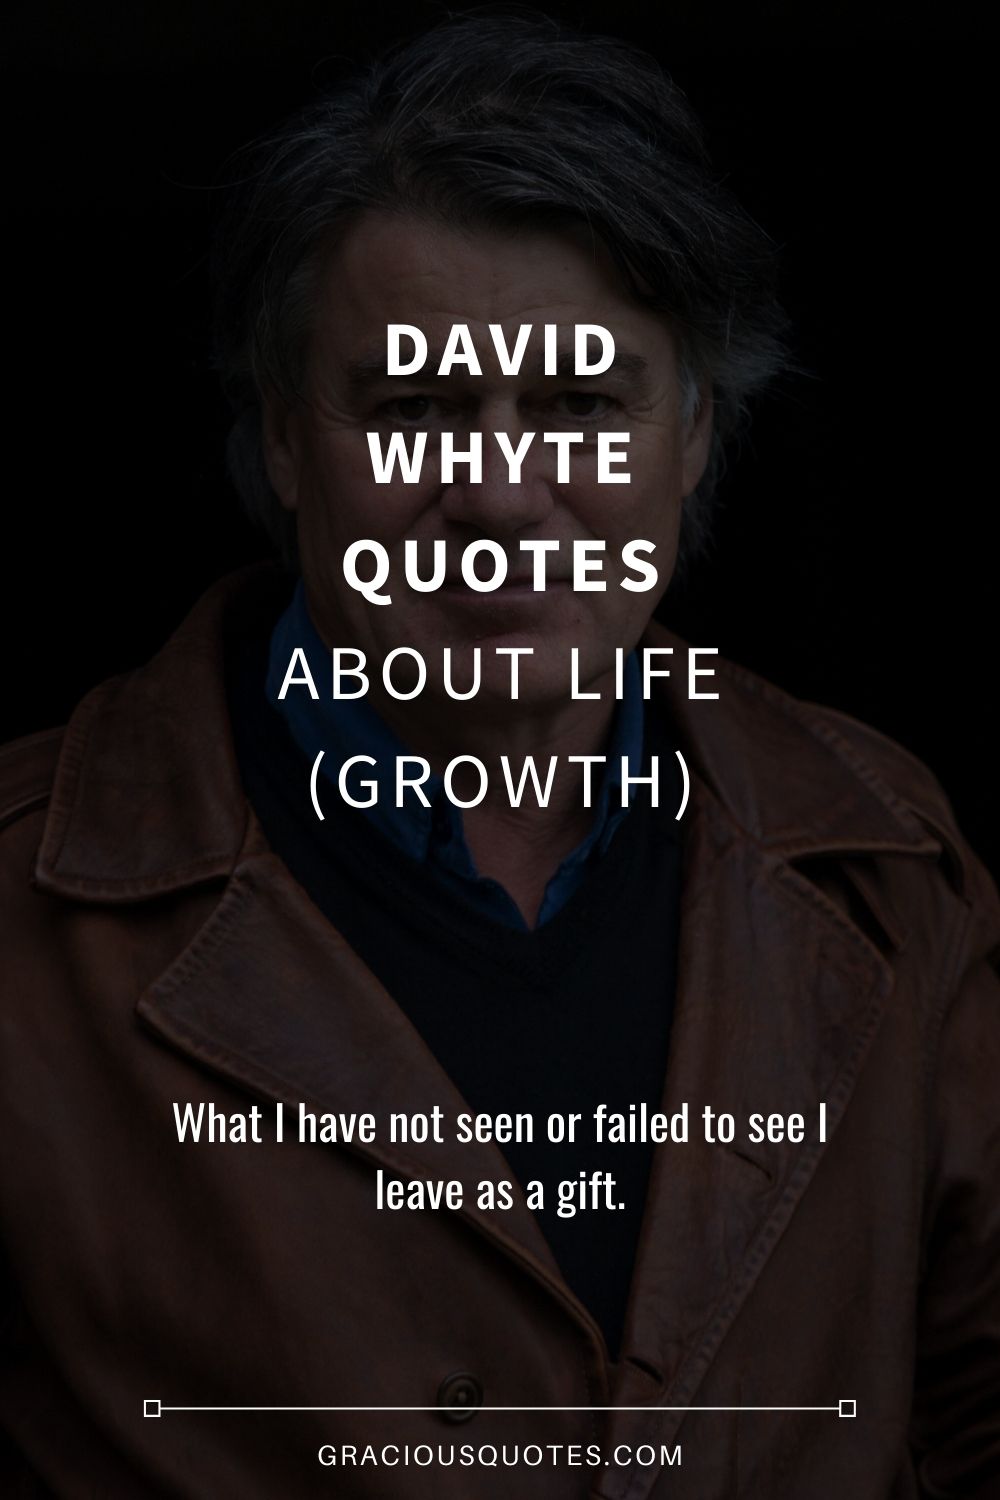 David Whyte Quotes About Life (GROWTH) - Gracious Quotes